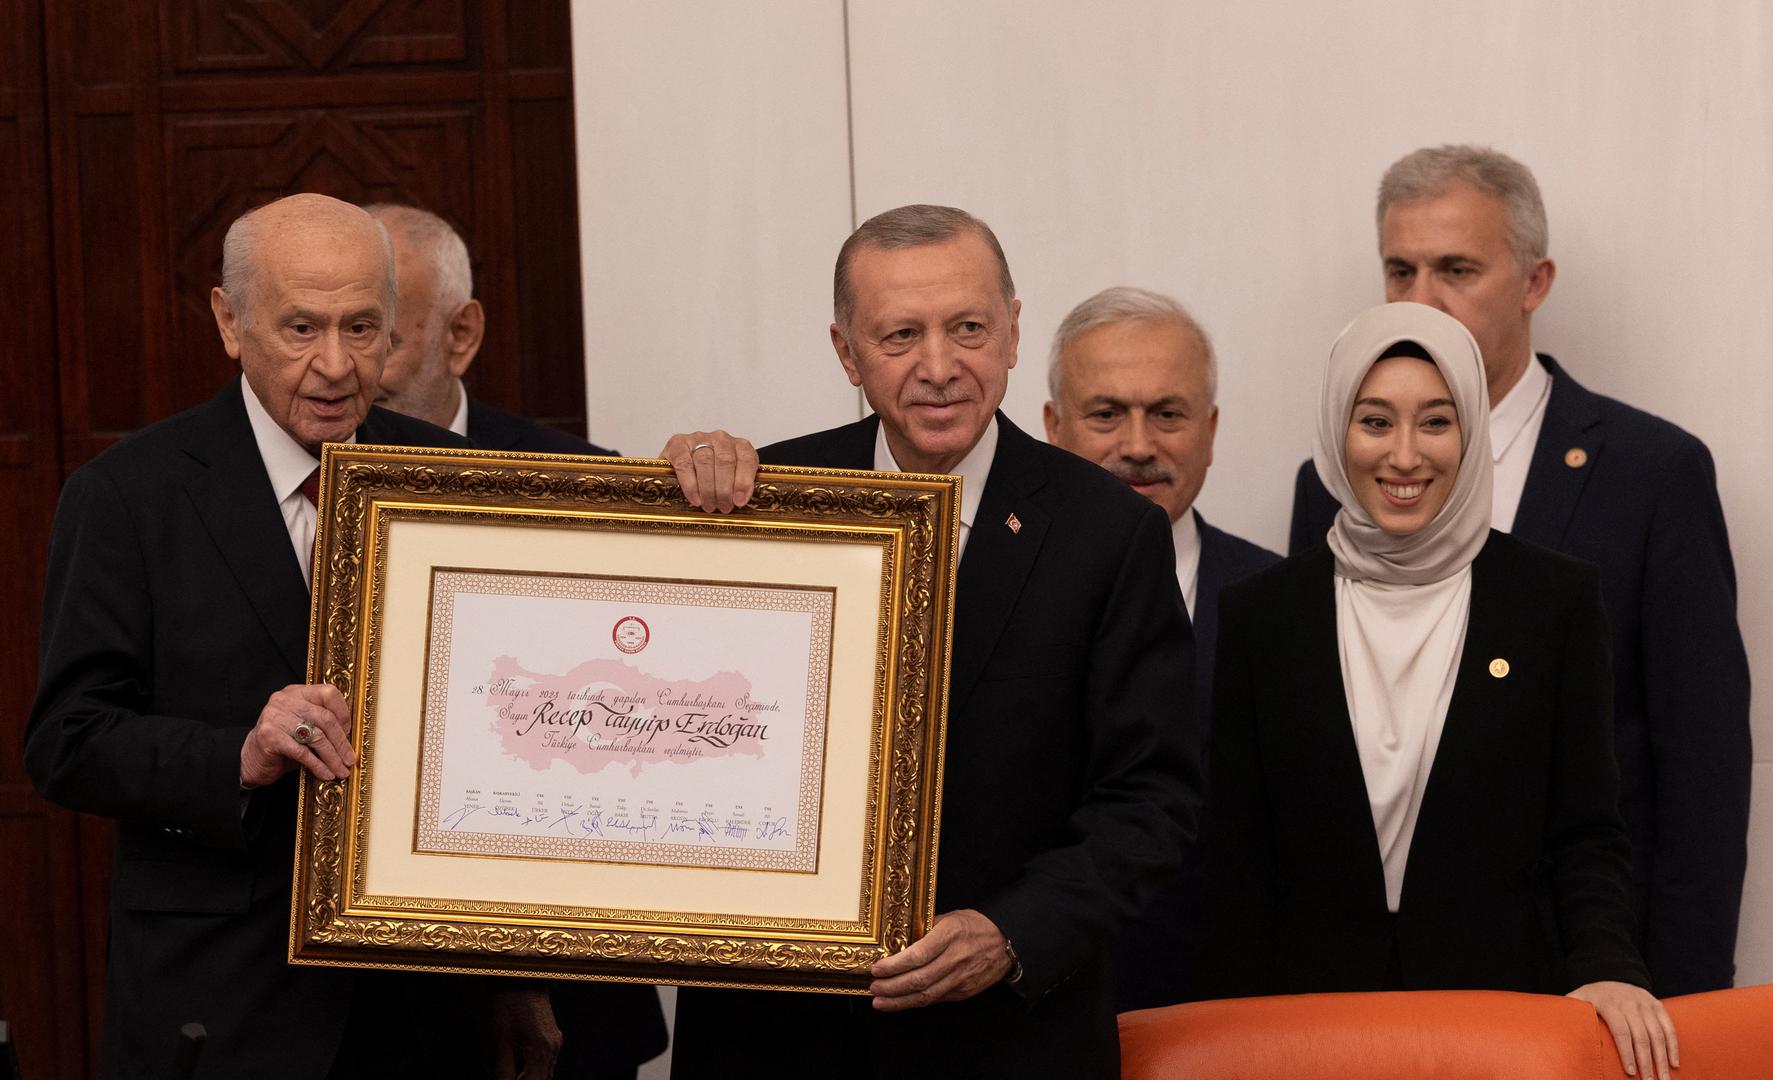 Turkish President Tayyip Erdogan receives his election mandate from Devlet Bahceli, speaker of the Parliament and leader of Nationalist Movement Party (MHP), takes oath after his election win at the parliament in Ankara, Turkey, June 3, 2023. REUTERS/Umit Bektas Photo: UMIT BEKTAS/REUTERS